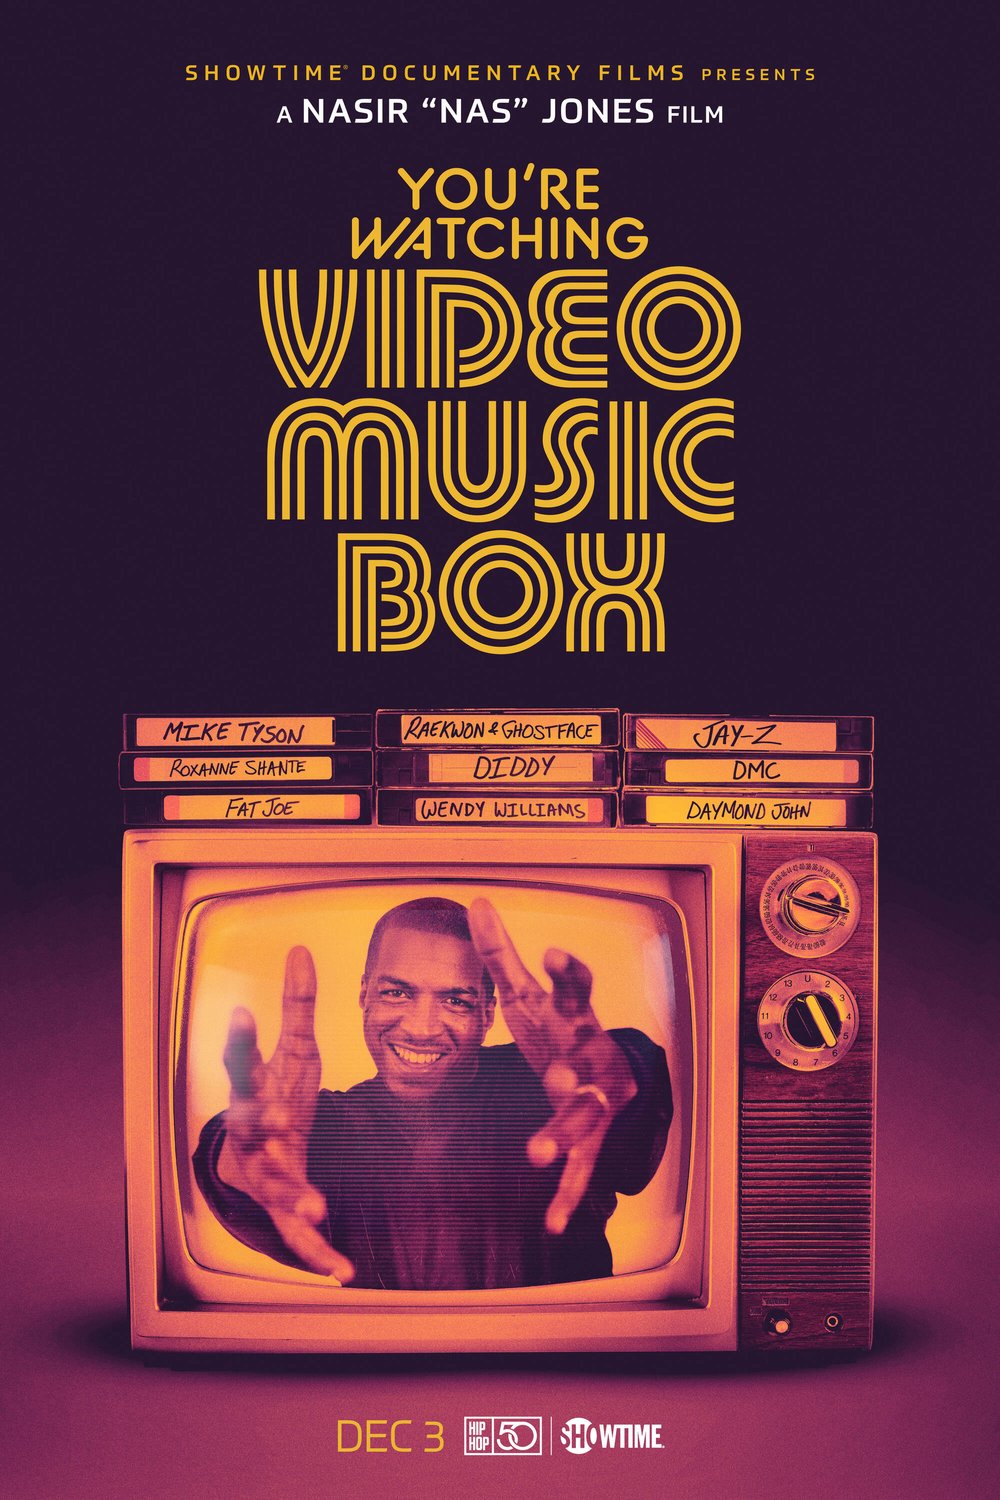 Poster of the movie You're Watching Video Music Box